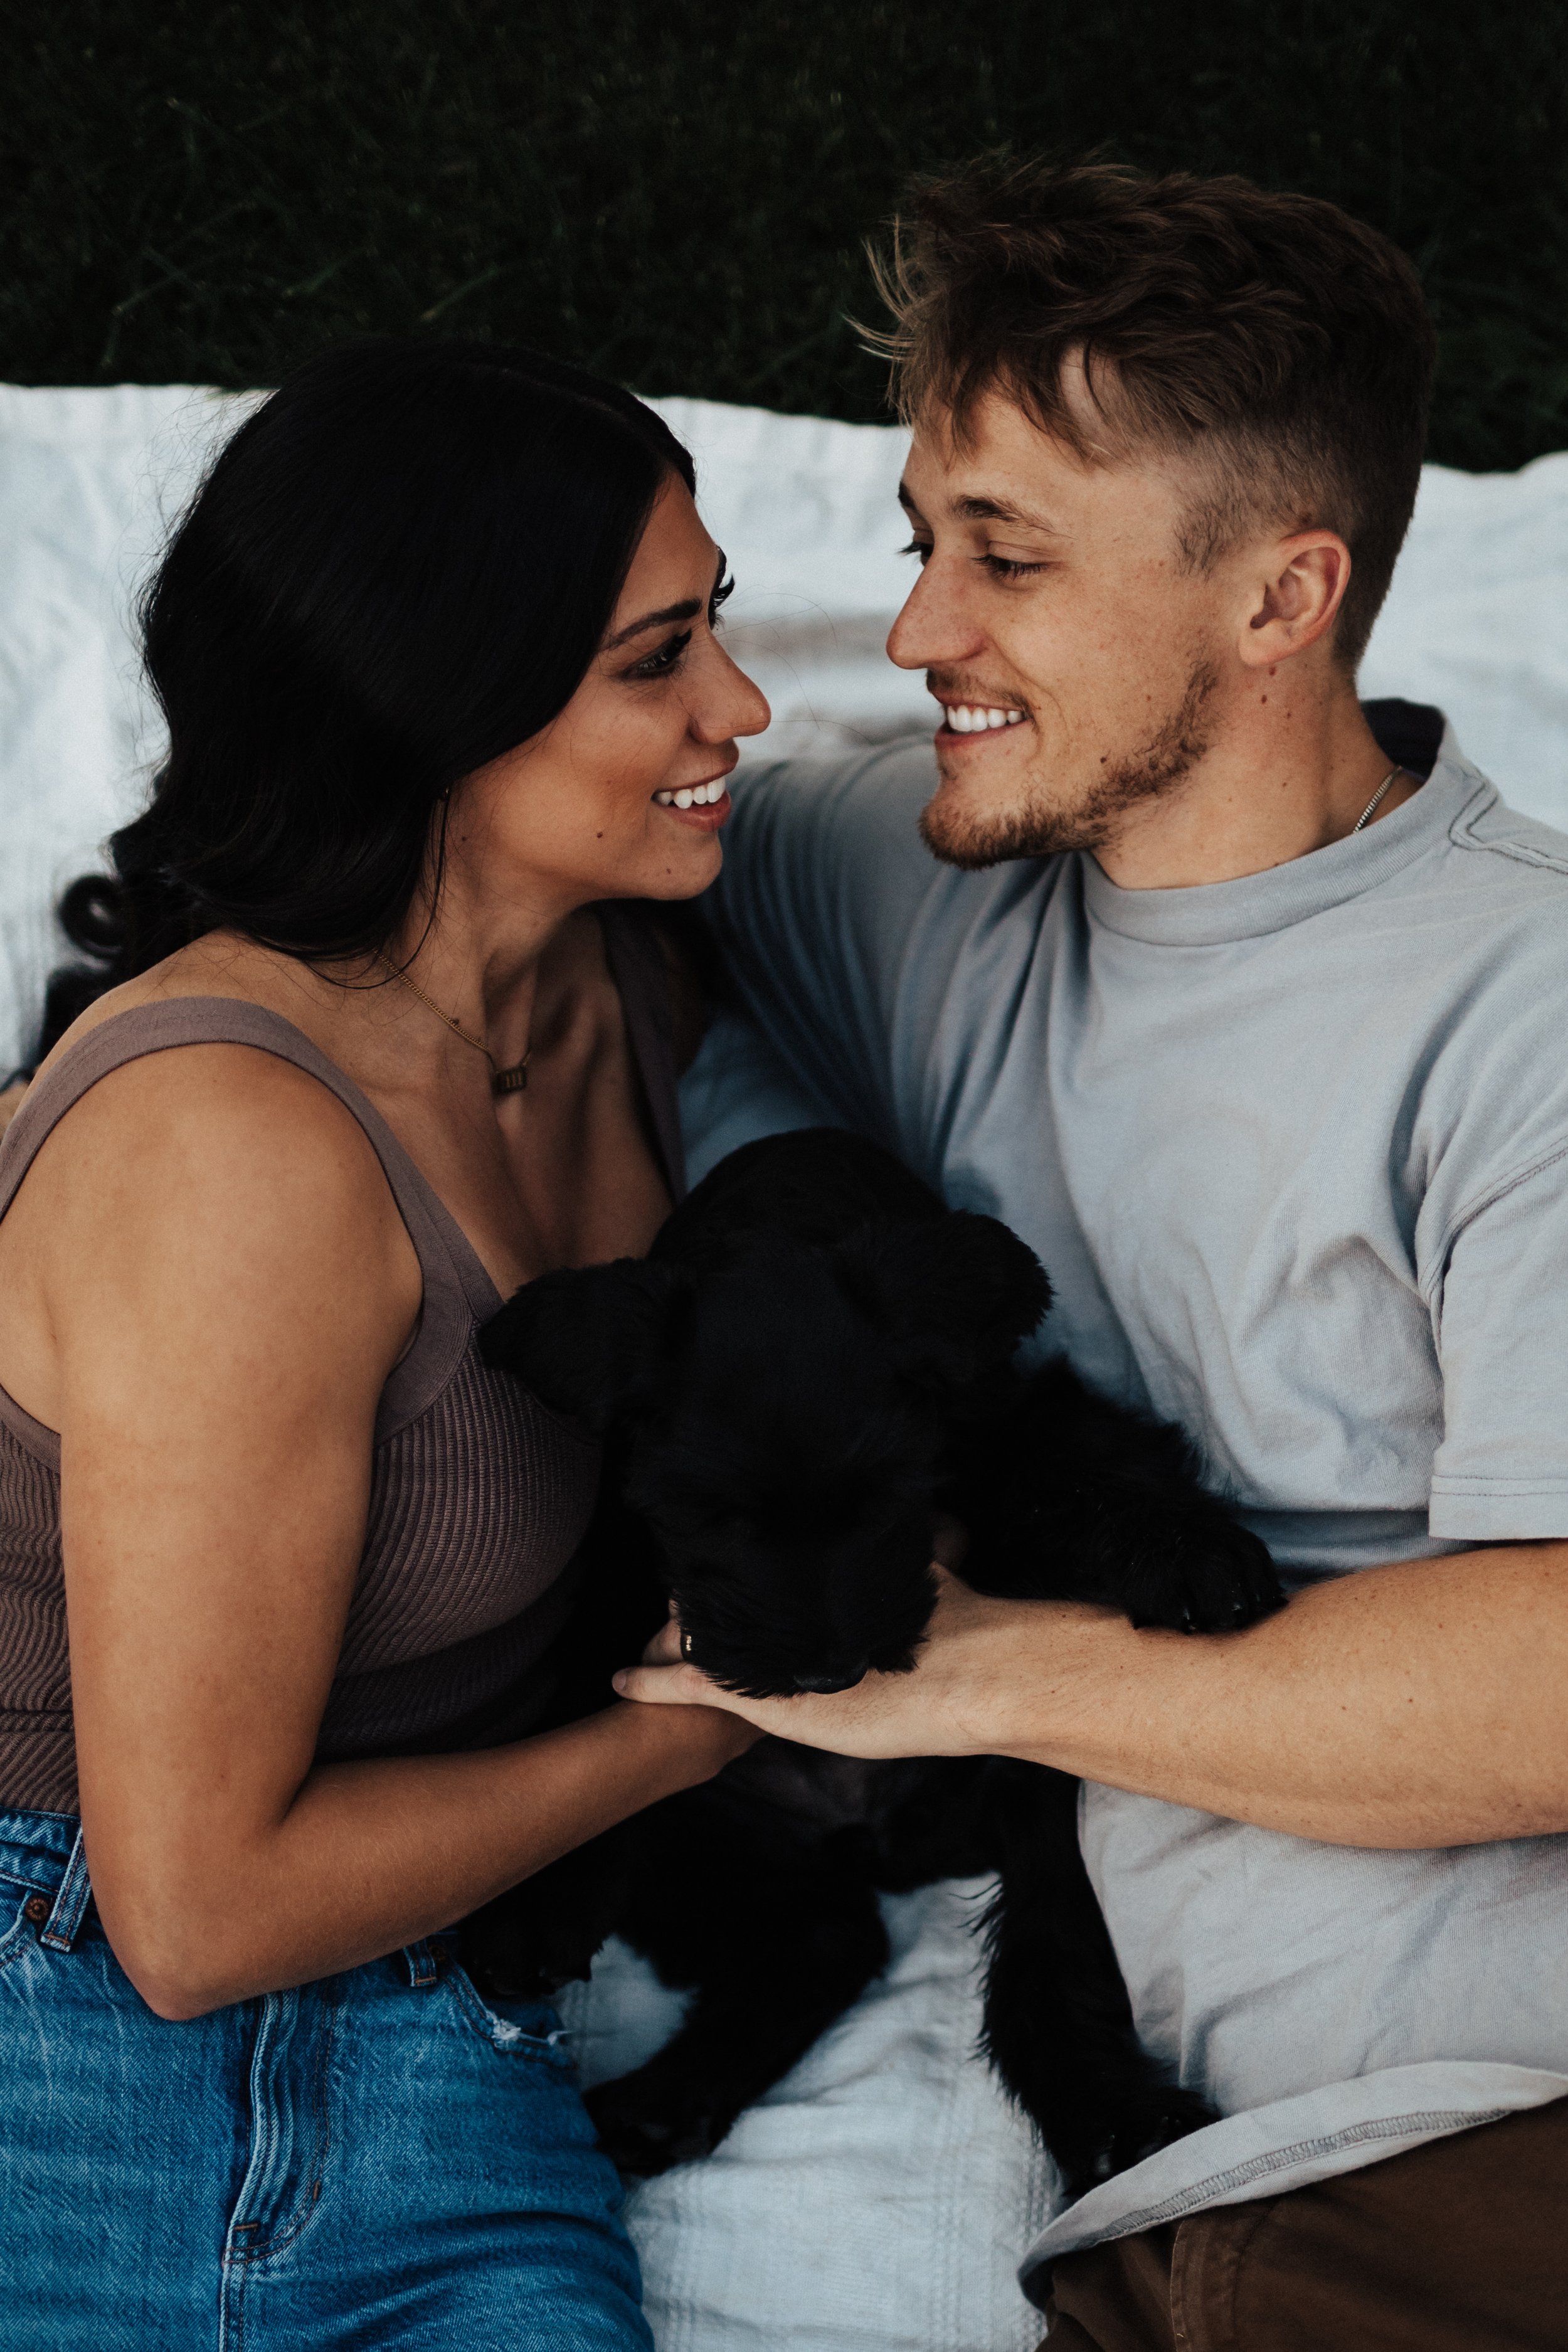 in-home-couples-shoot-with-dog-16.jpg